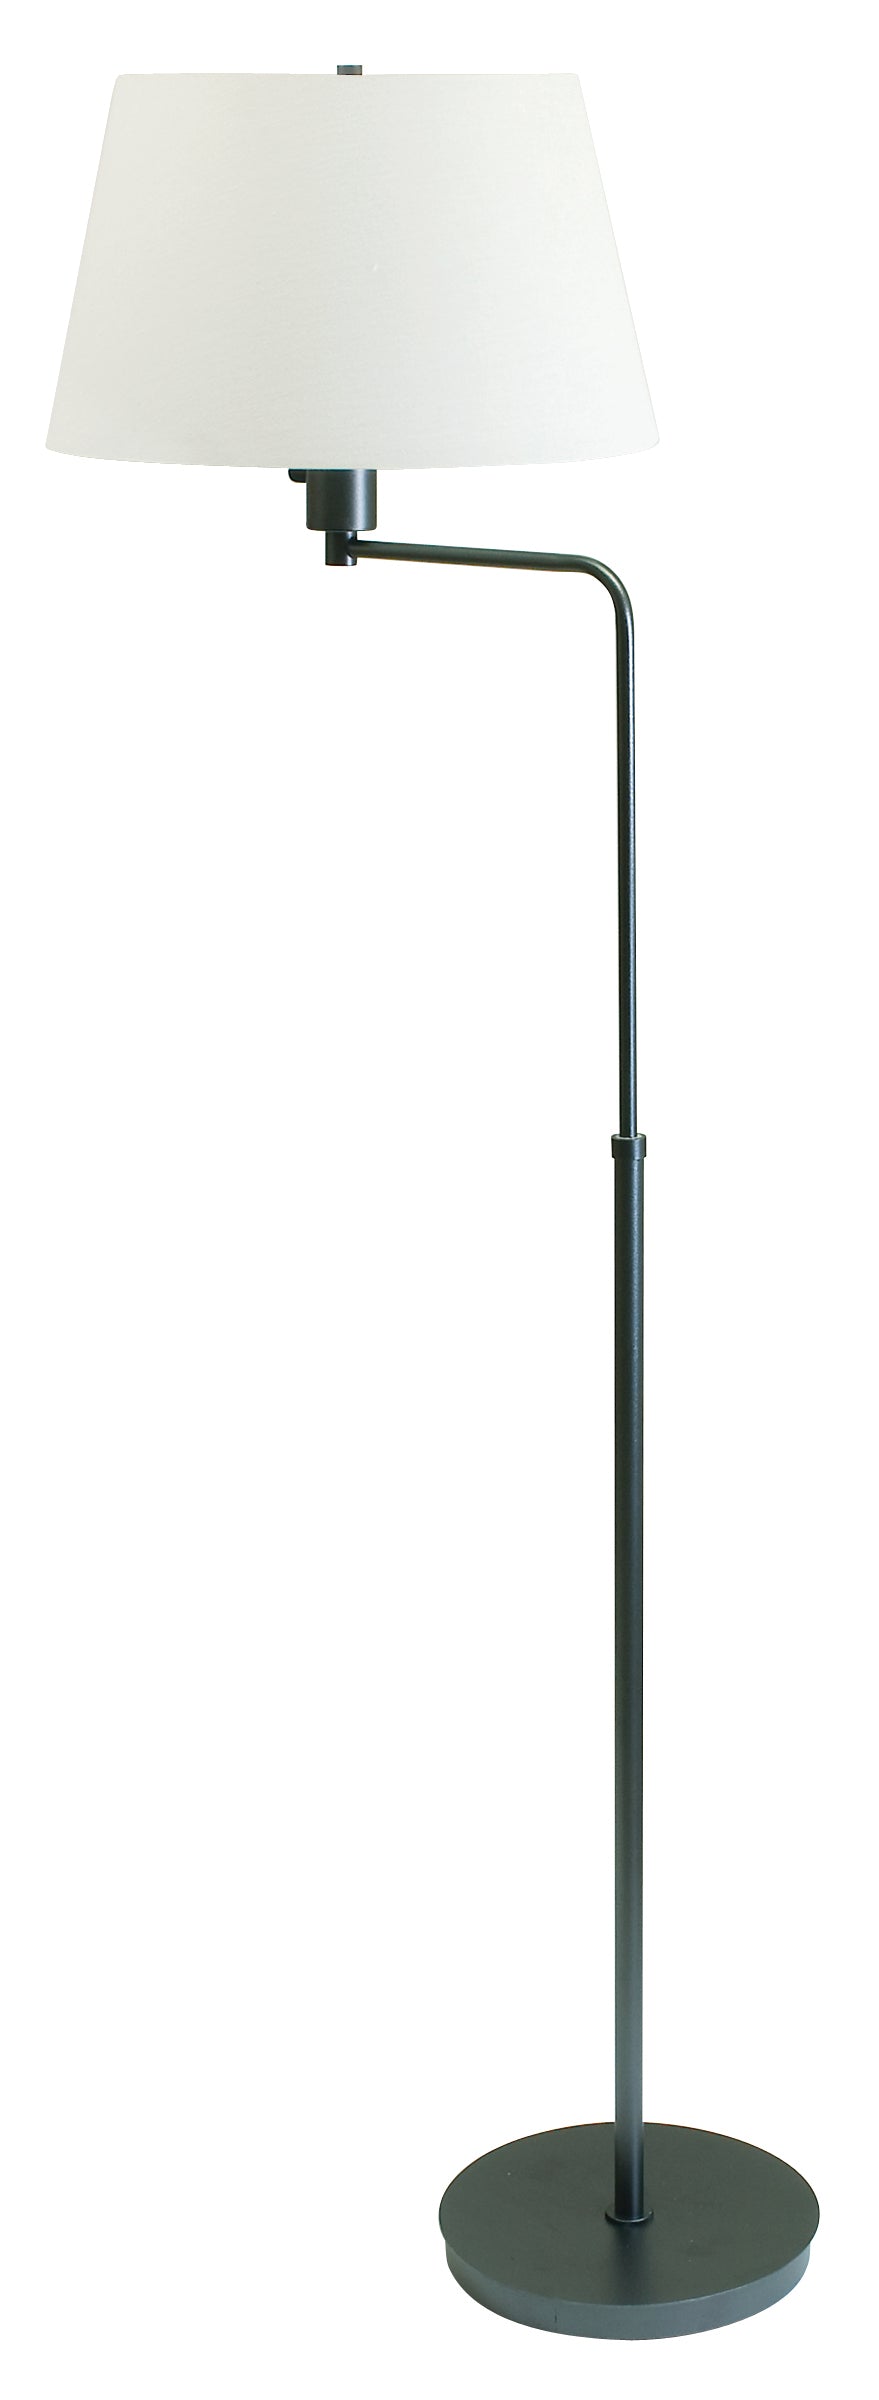 House of Troy Generation Collection Adjustable Floor Lamp Granite G200-GT